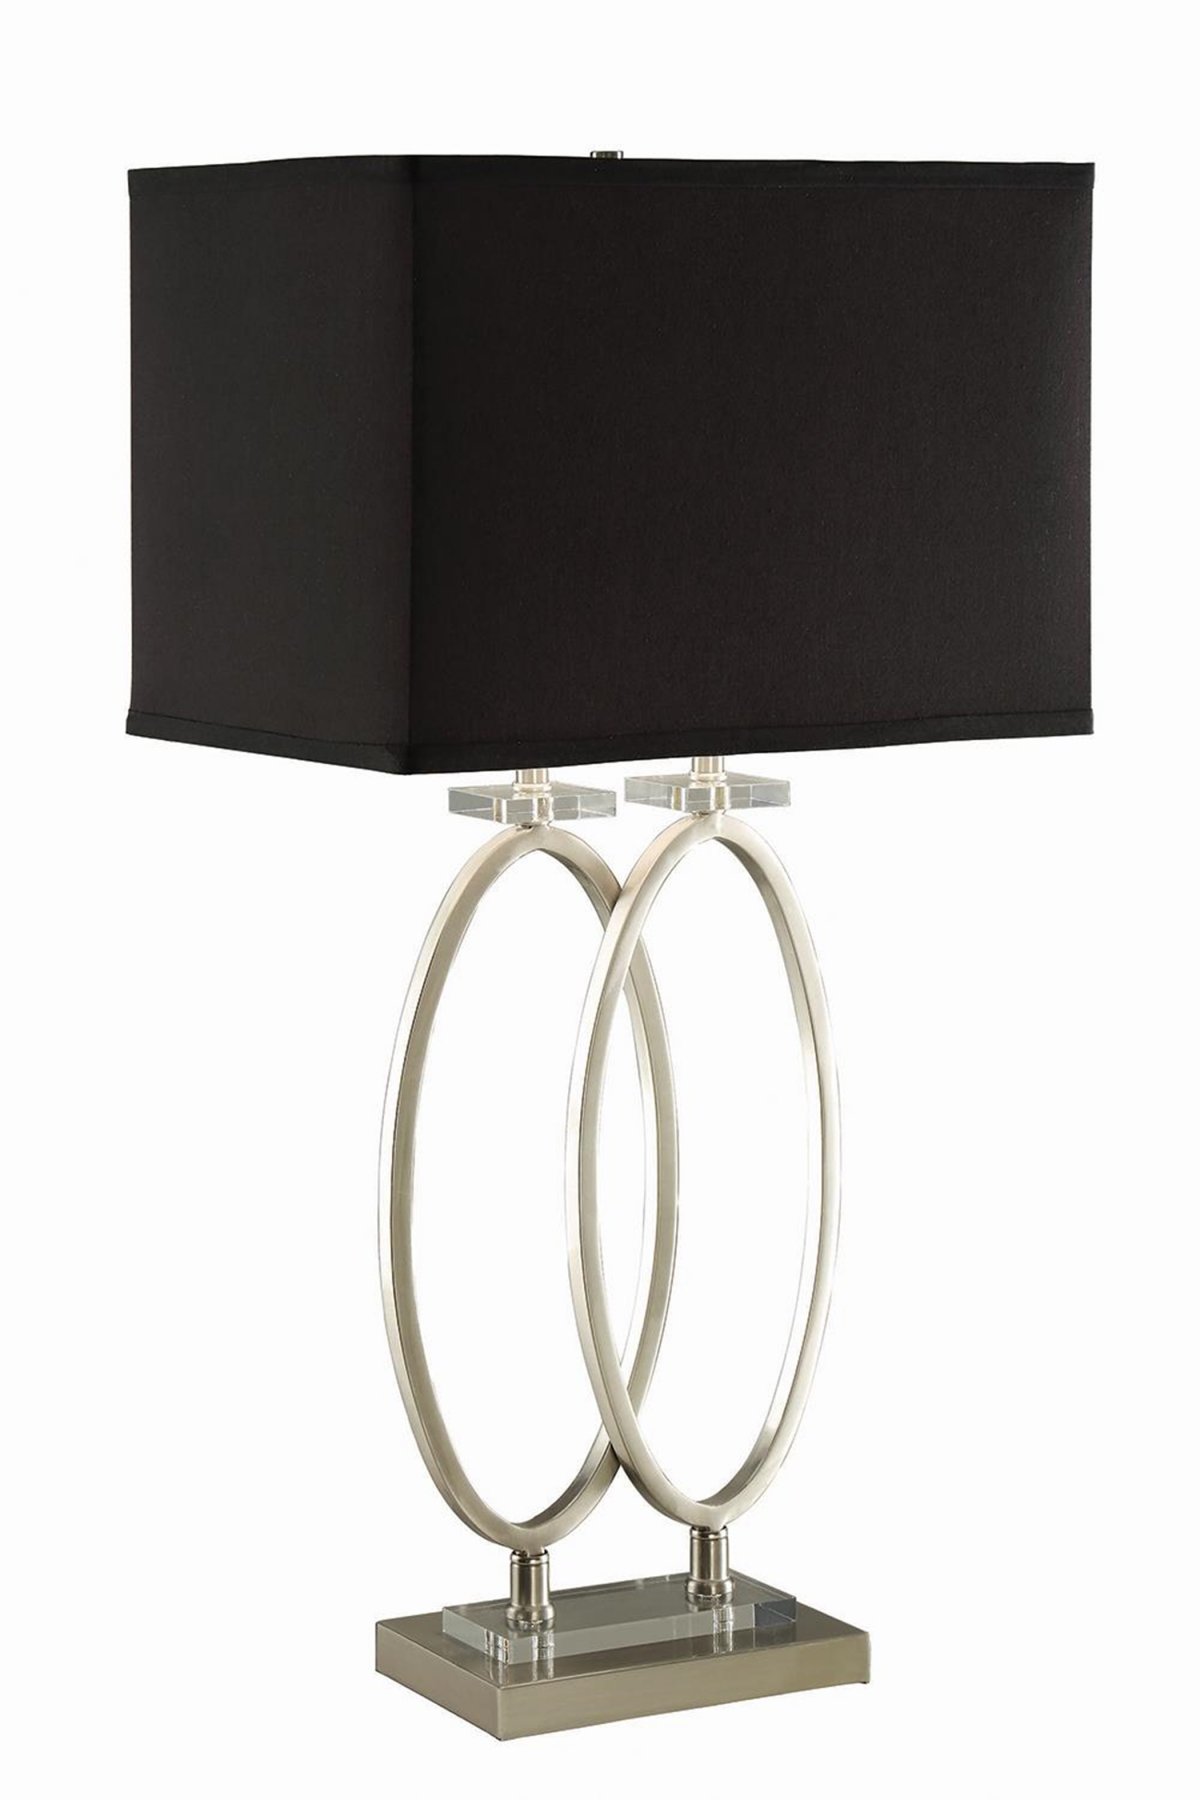 Transitional Nickel and Black Accent Lamp